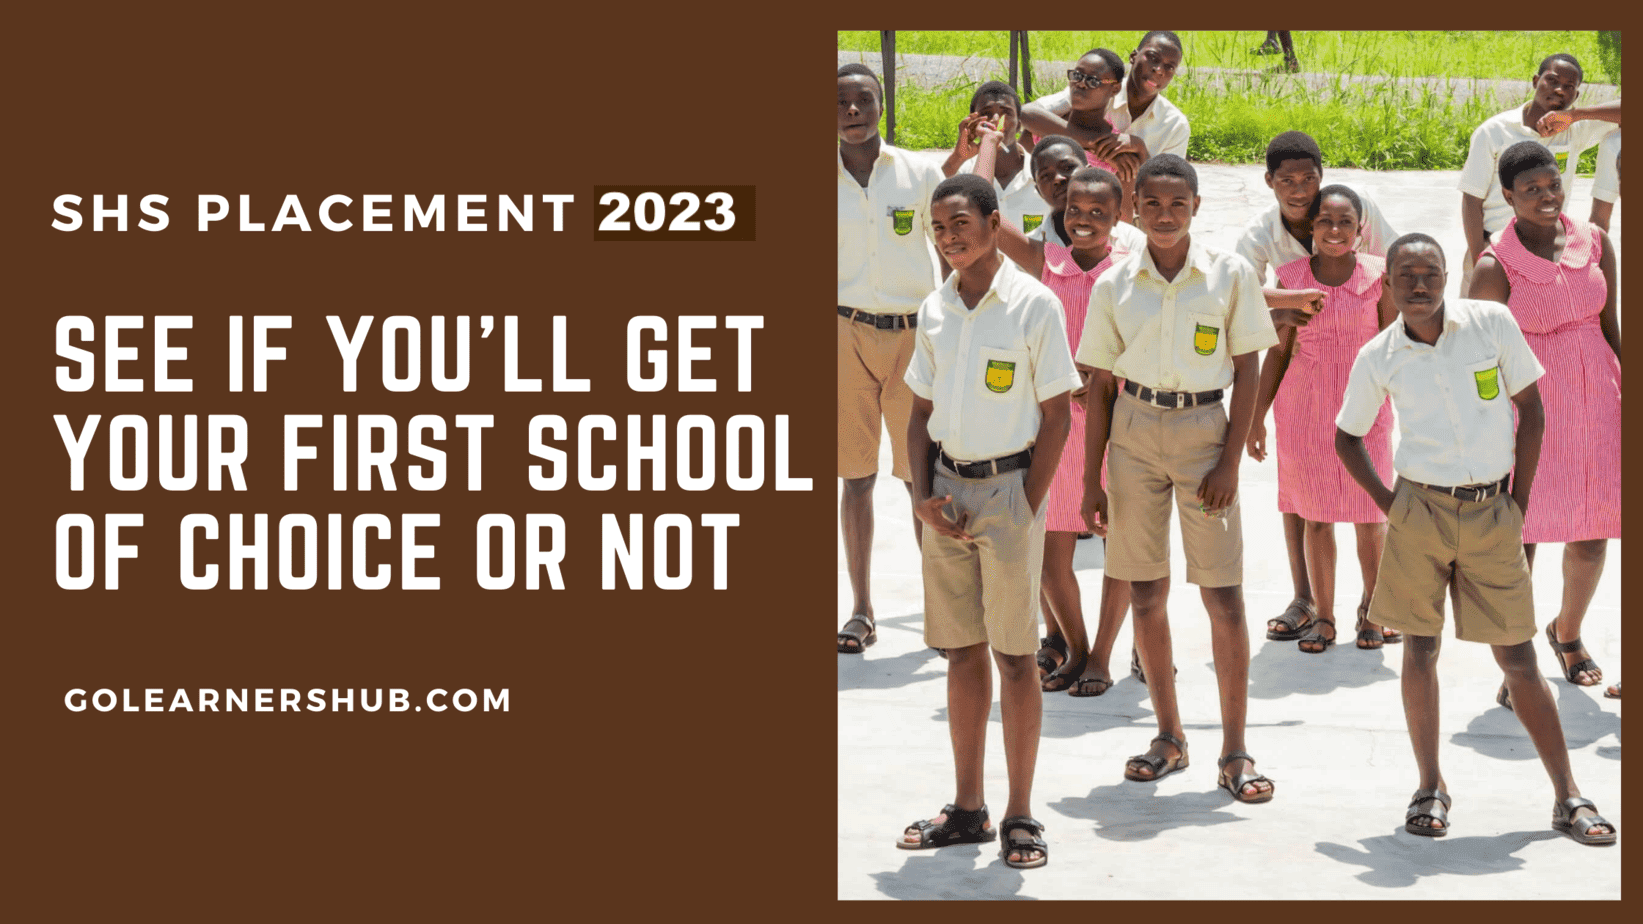 SHS Placement 2023 See If you'll Get Your First School of Choice or Not